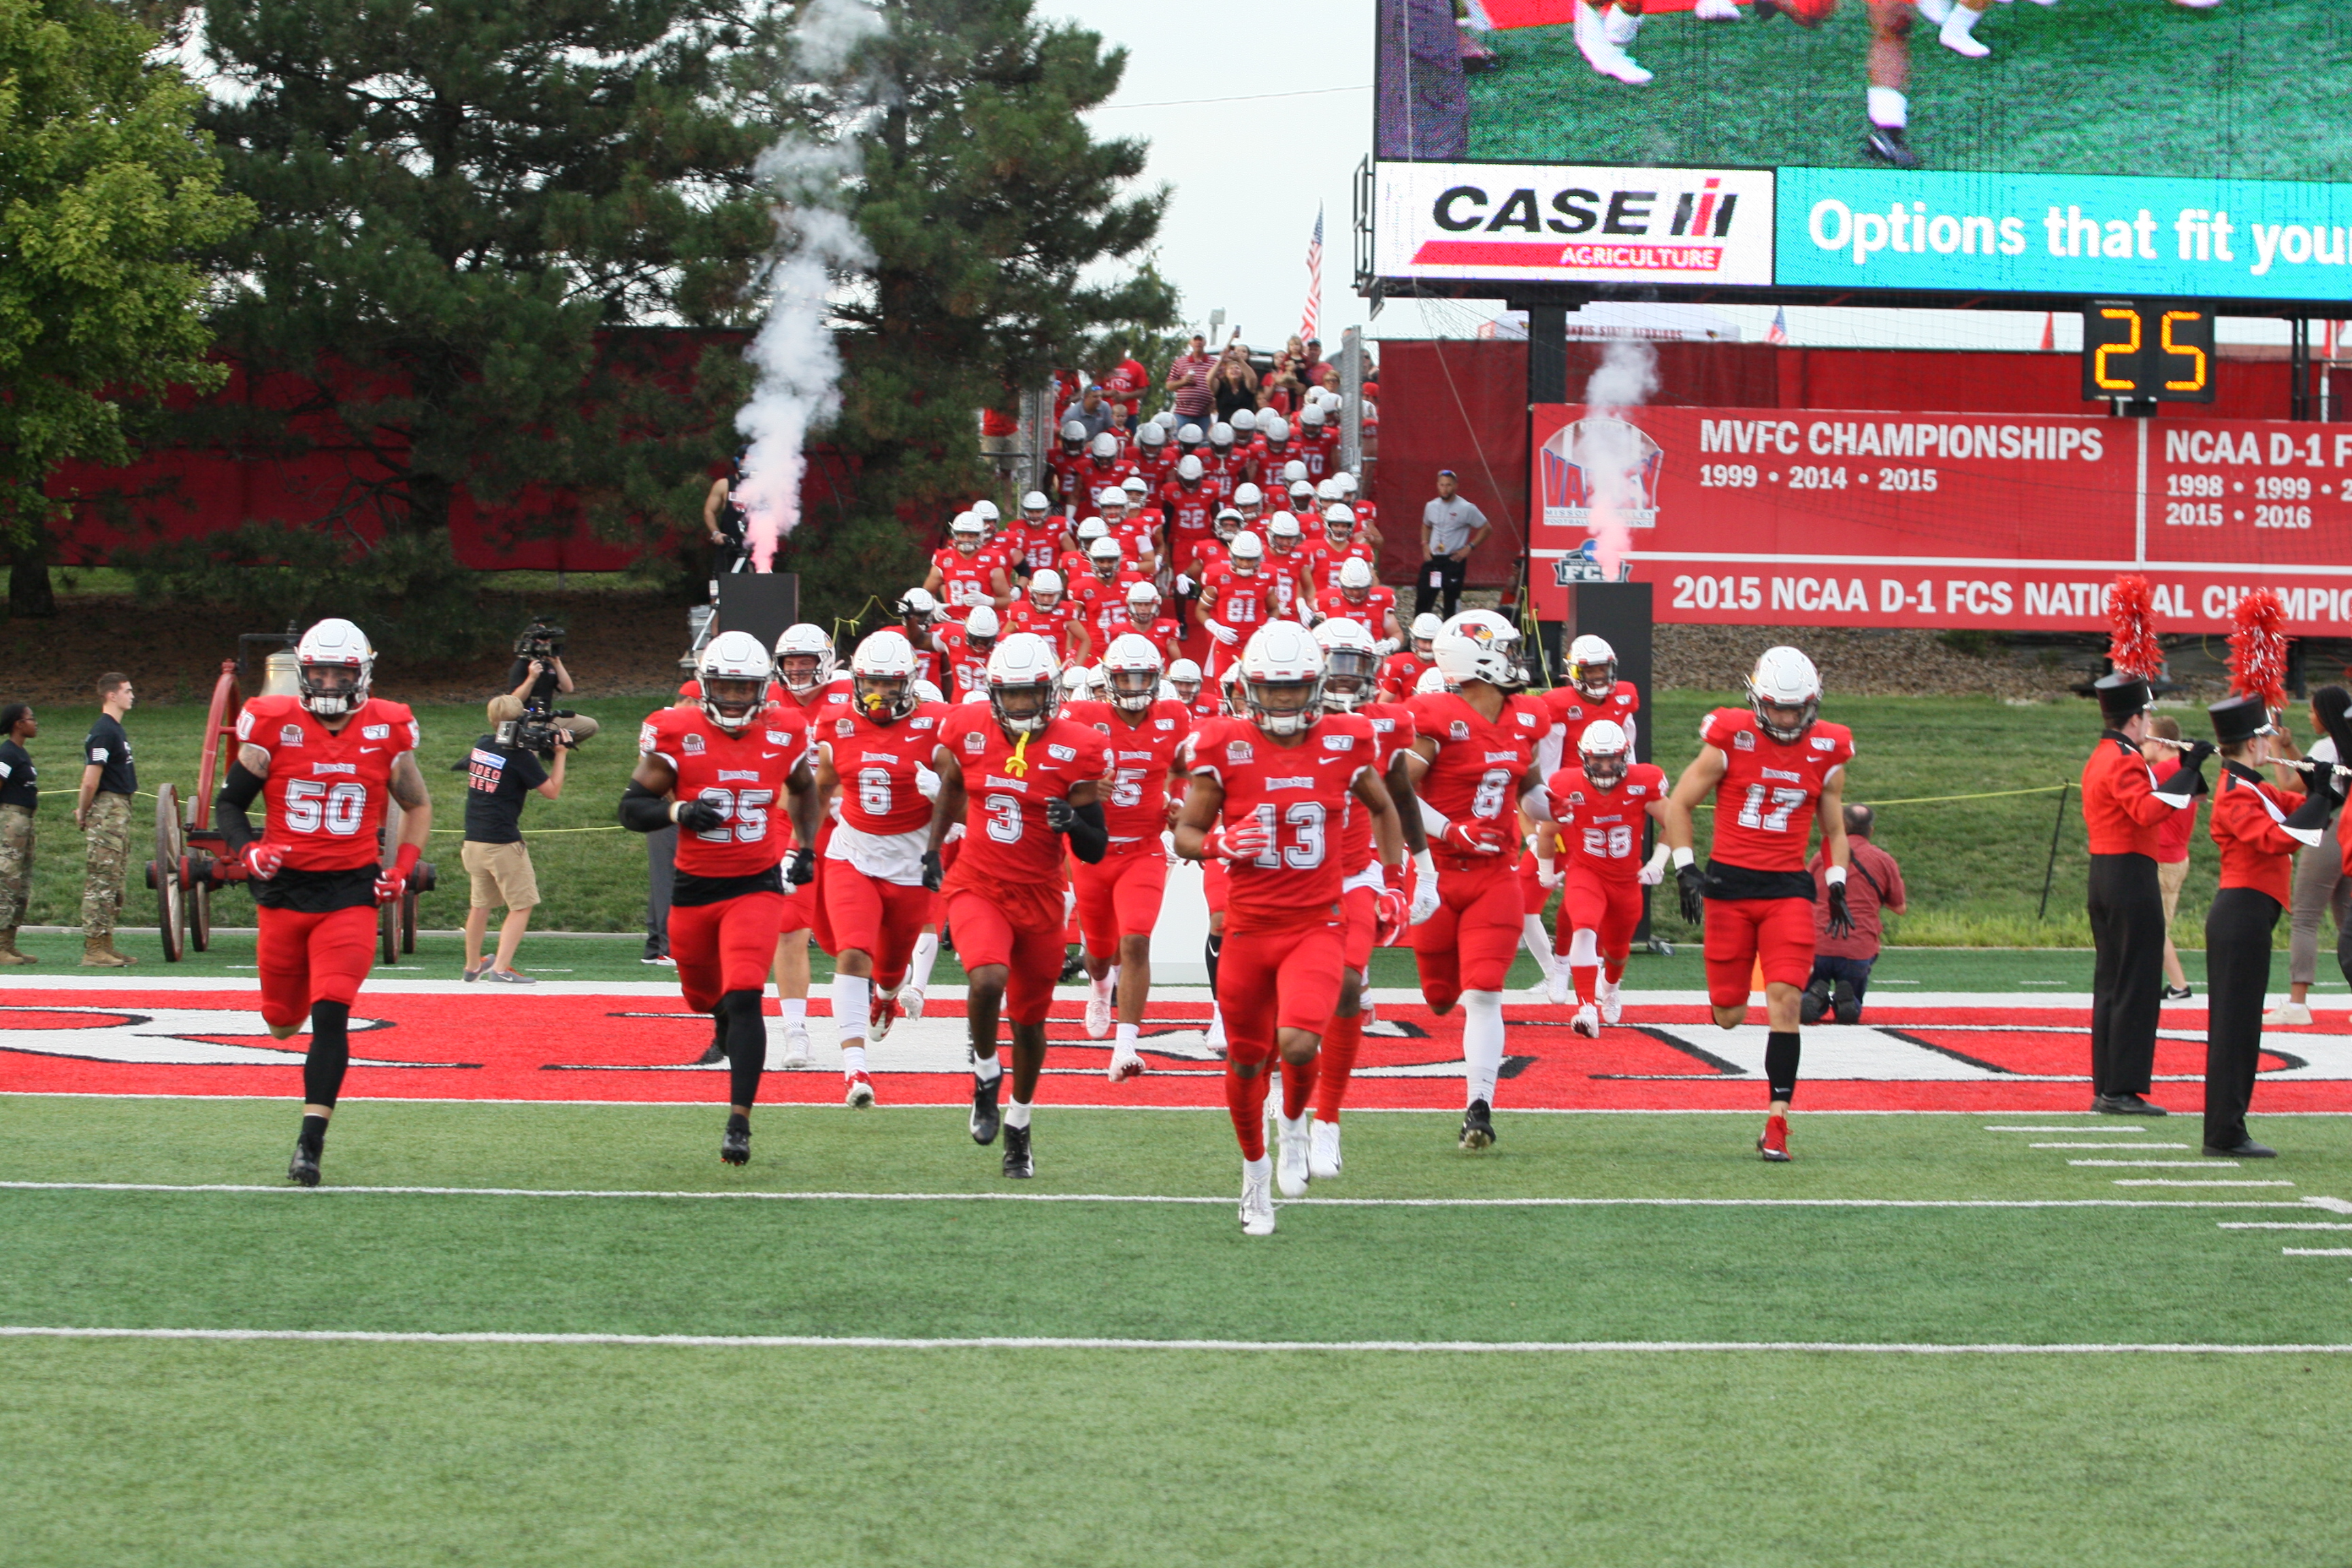 The Illinois State football team runs on to the field at their Sept. 7 home opener vs. Morehead State.